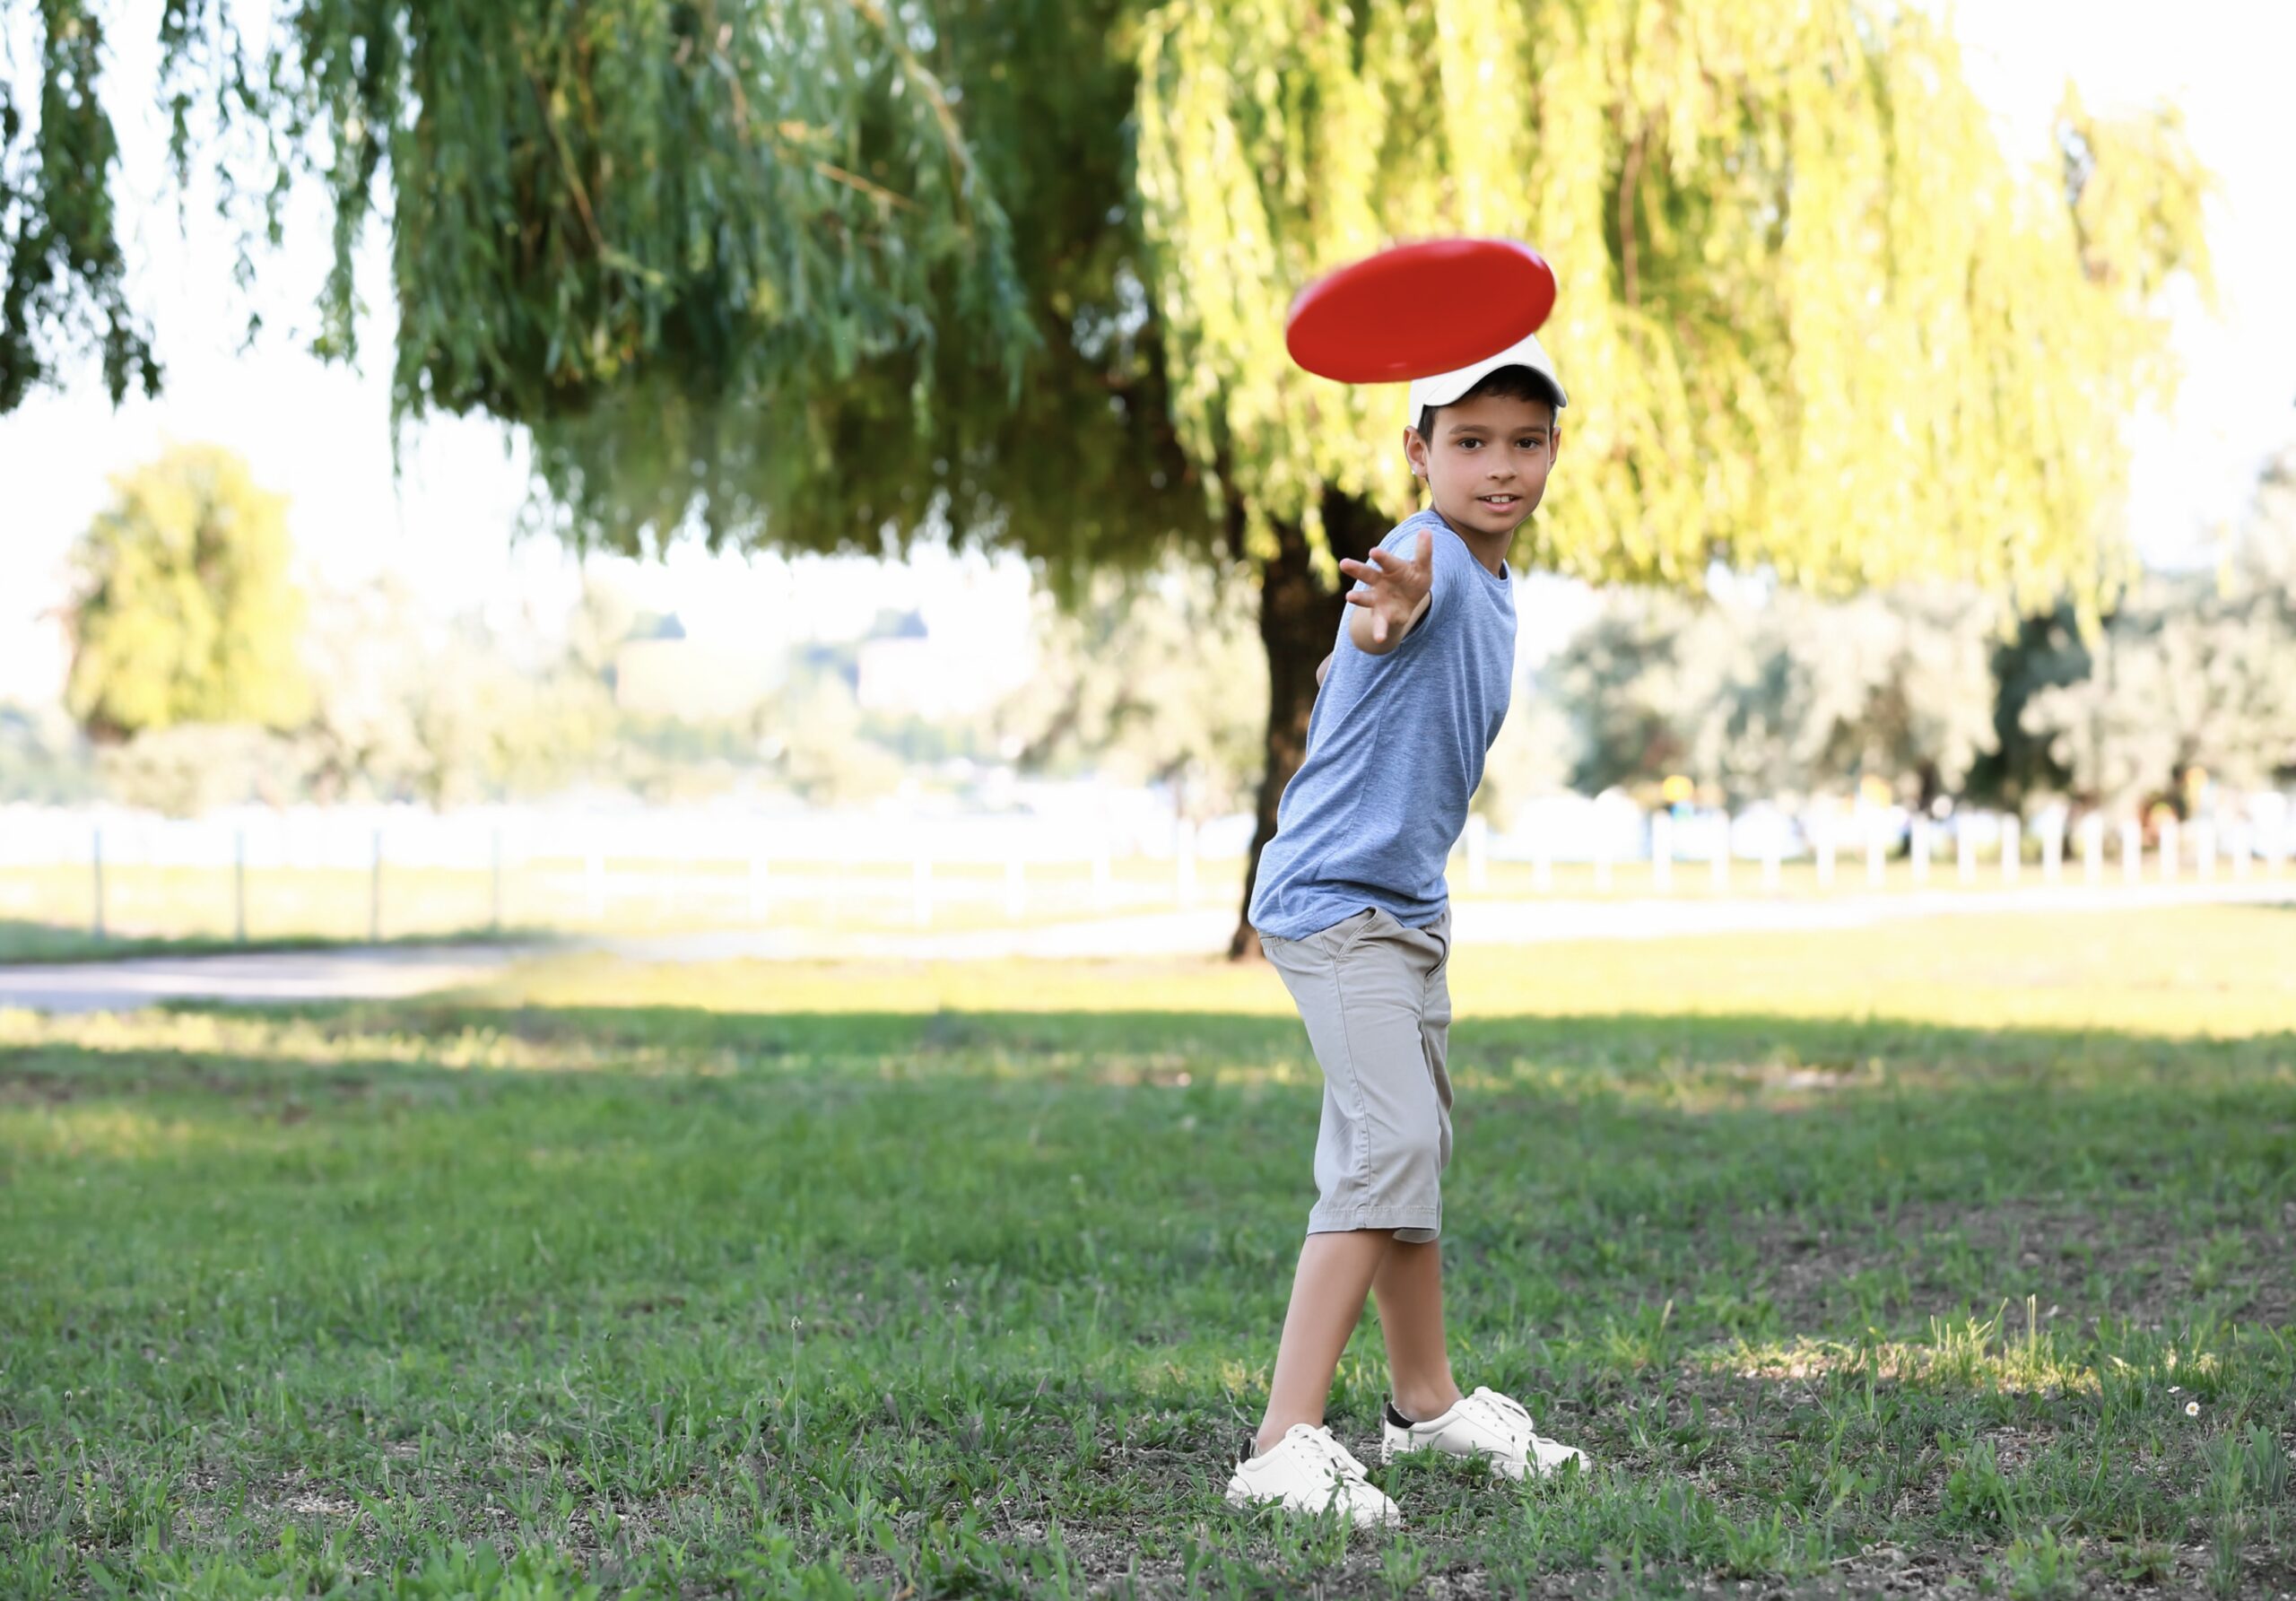 Mastering Disc Golf Approach and Upshot Strategies